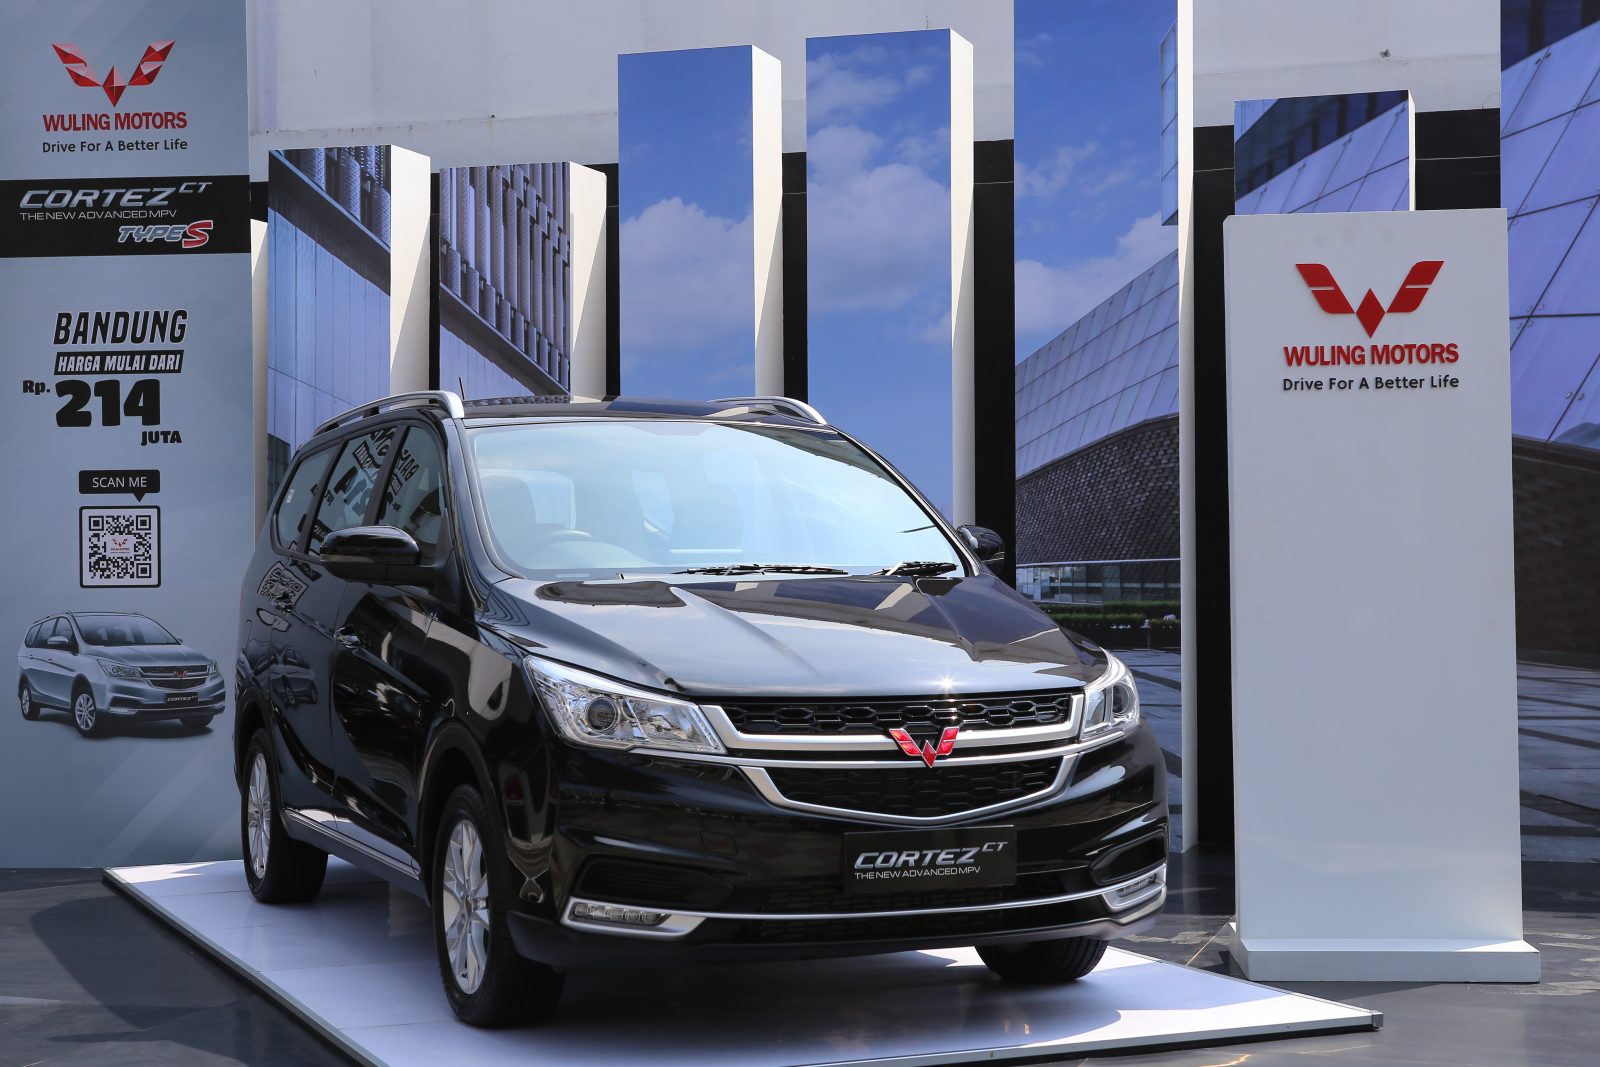 Image Wuling Cortez CT Type S Started to be Marketed in Bandung